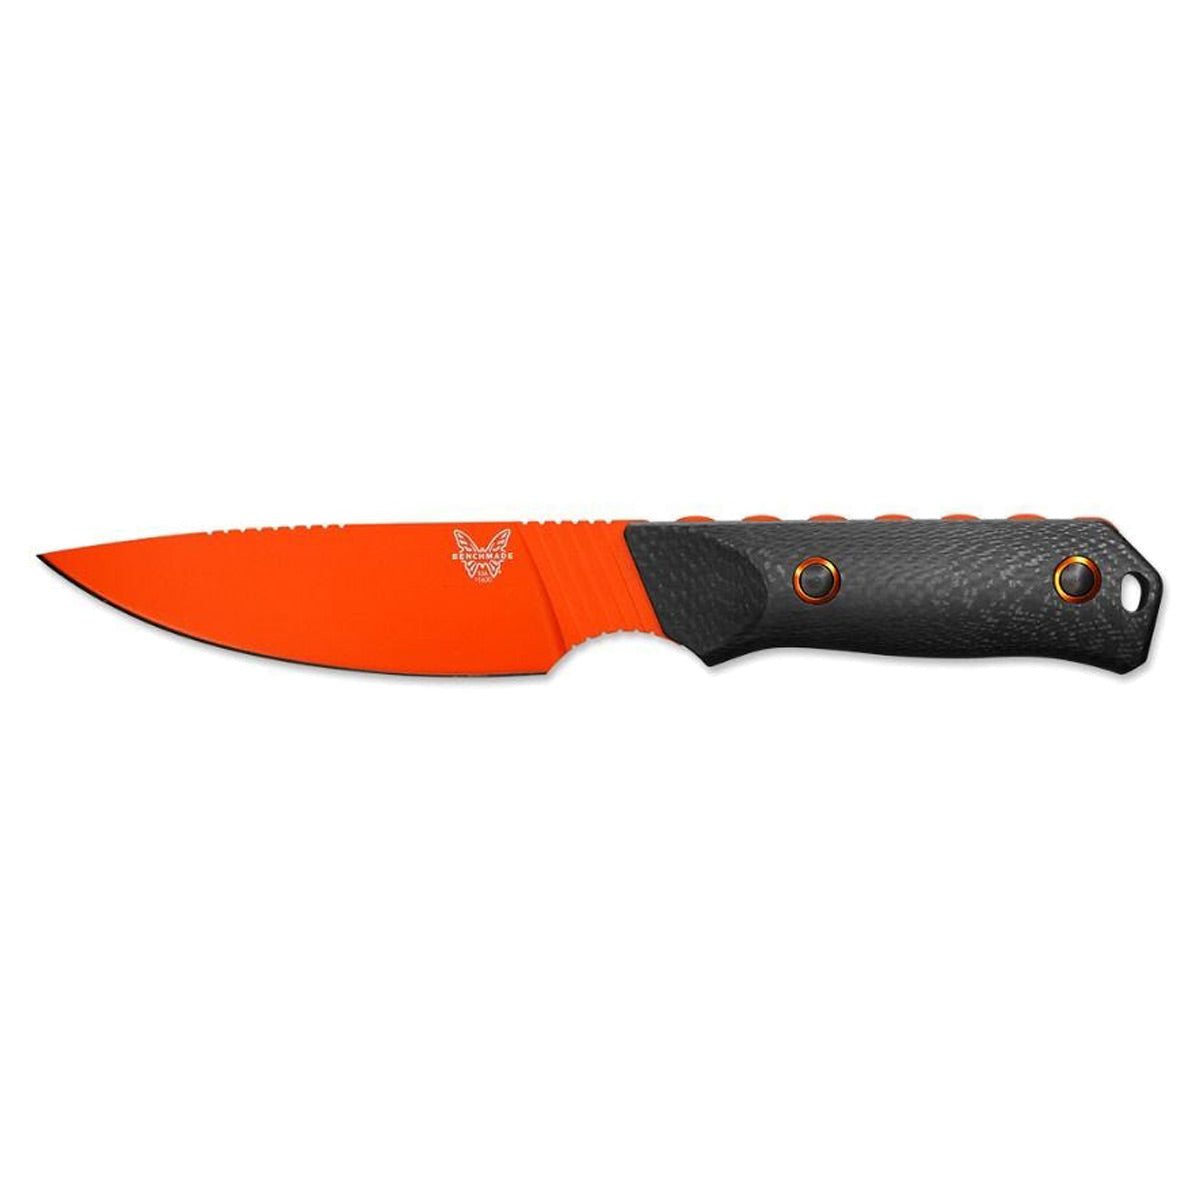 Benchmade 15600OR Raghorn in  by GOHUNT | Benchmade - GOHUNT Shop